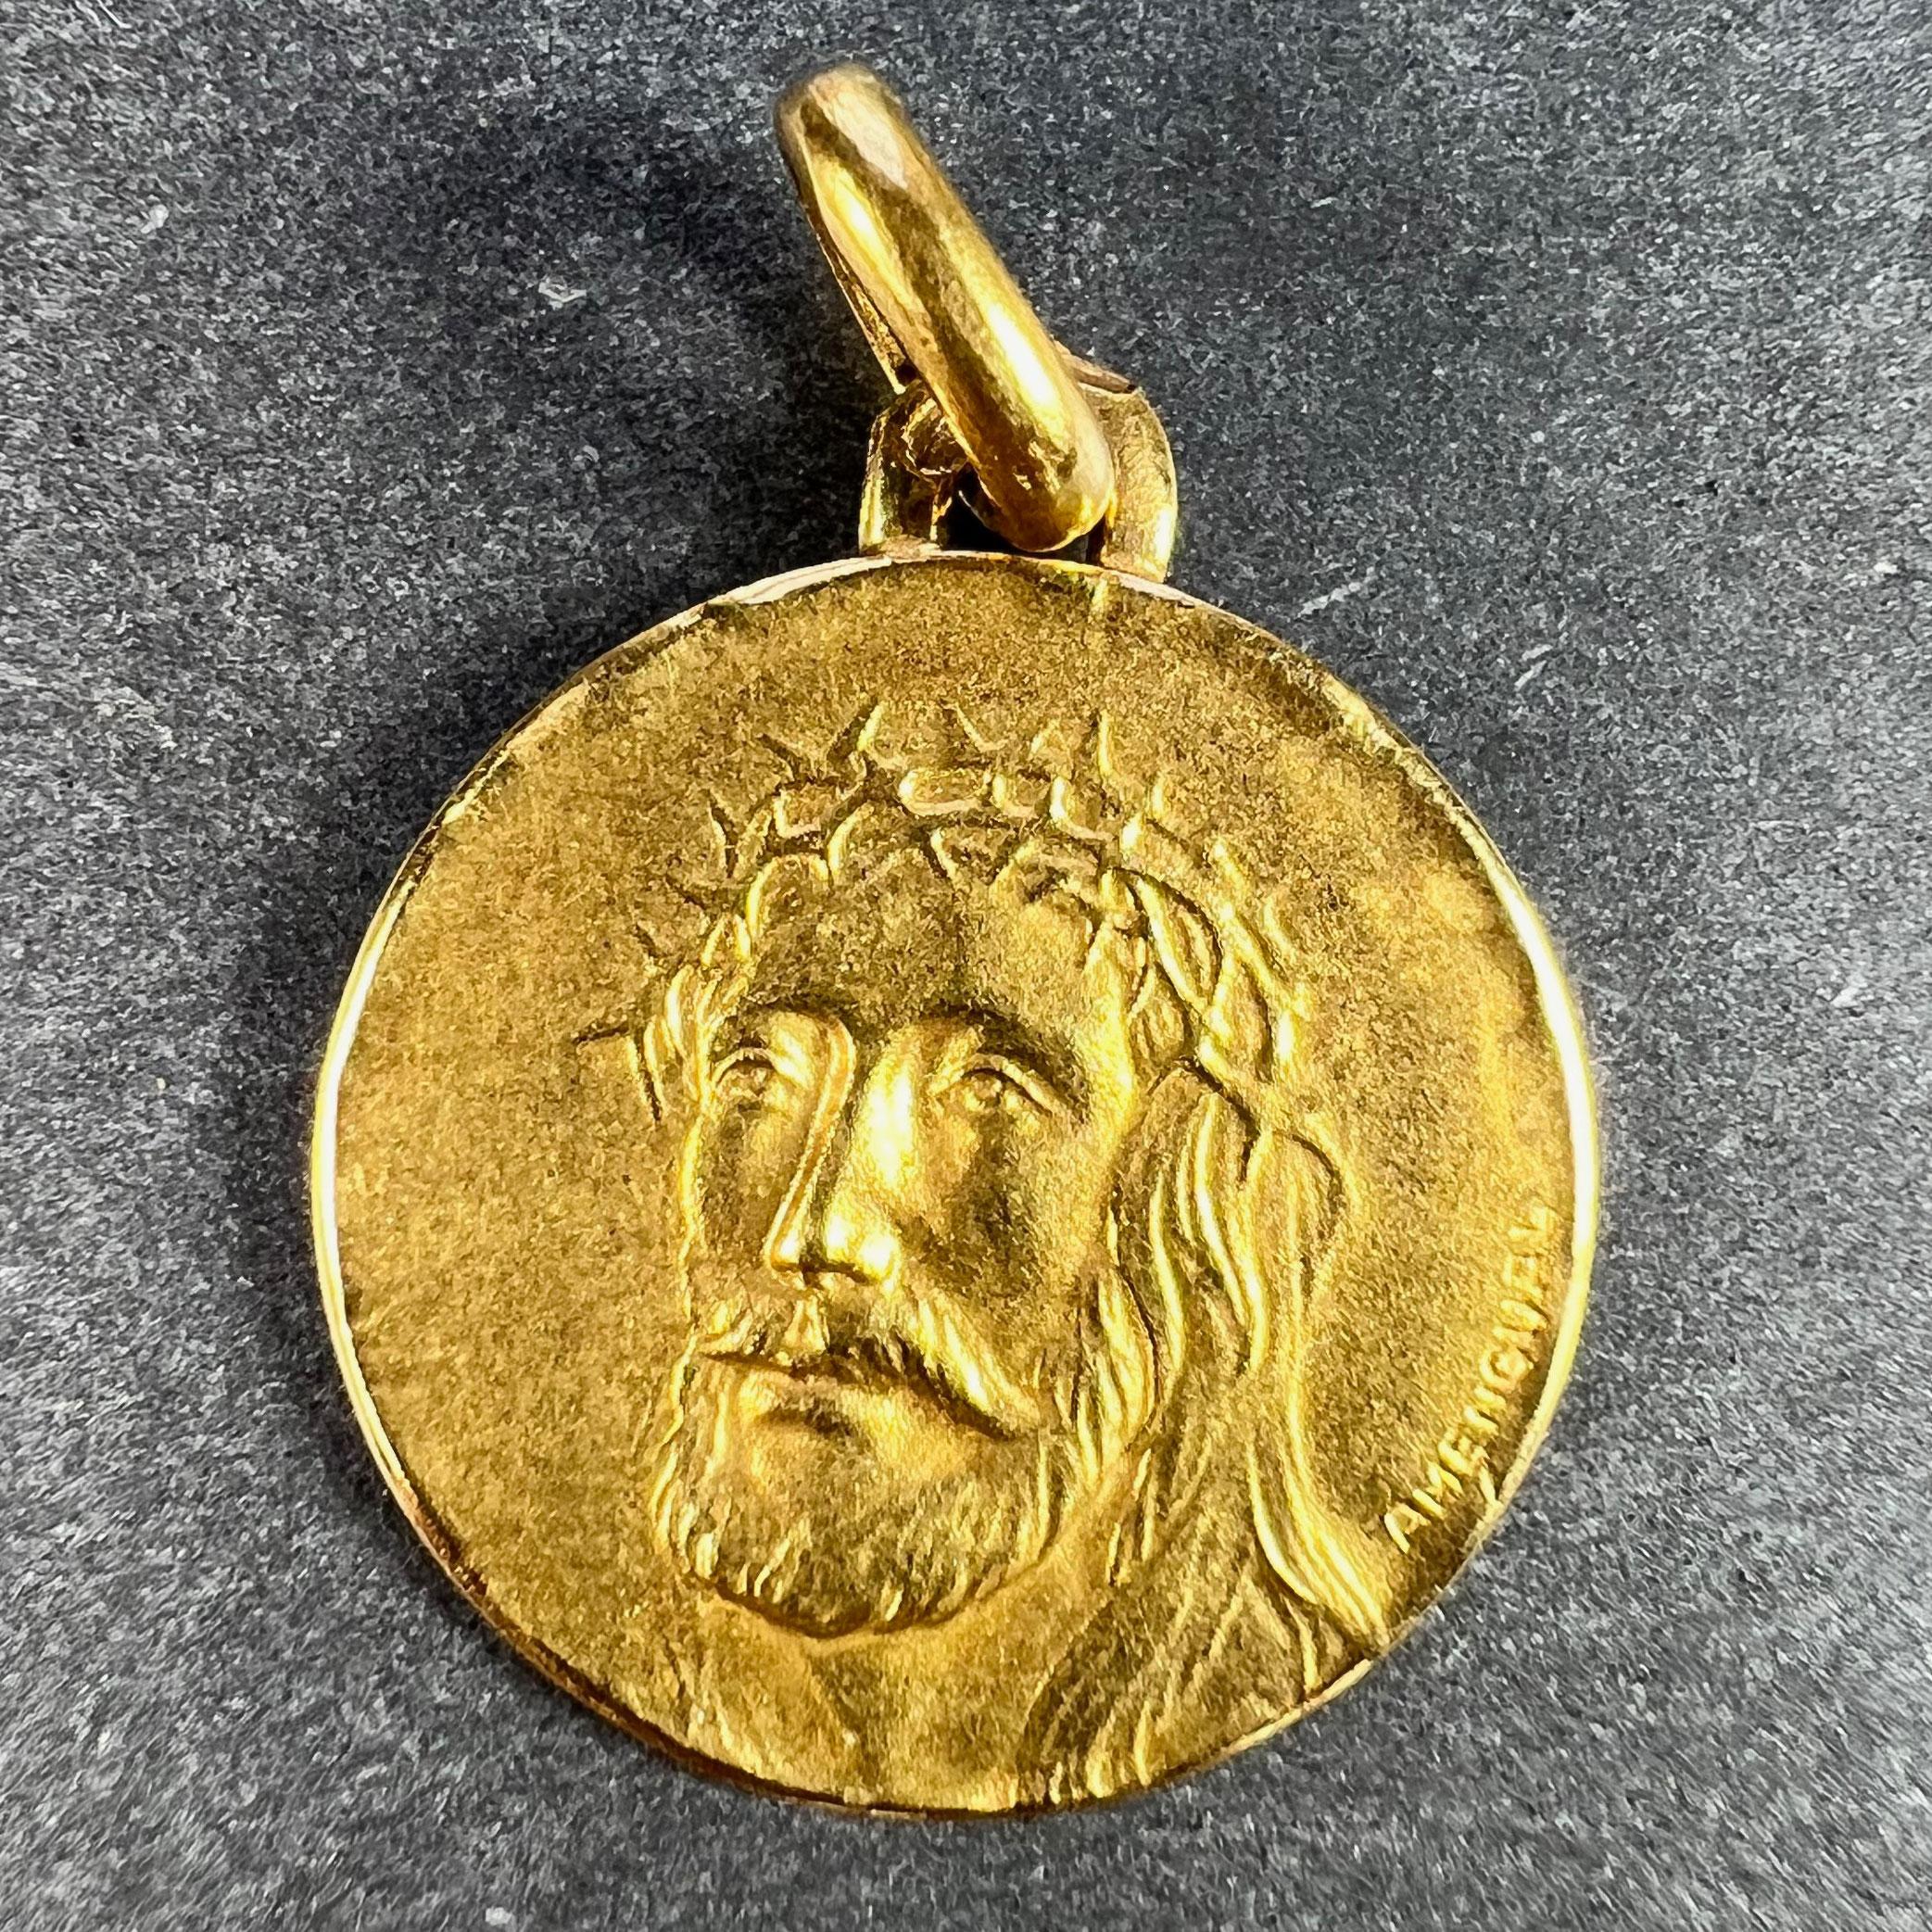 A French 18 karat (18K) yellow gold charm pendant designed as a round medal depicting the face of Jesus Christ wearing the Crown of Thorns. Signed Amengual, stamped with the eagle’s head for 18 karat gold and French manufacture.

Dimensions: 1.9 x